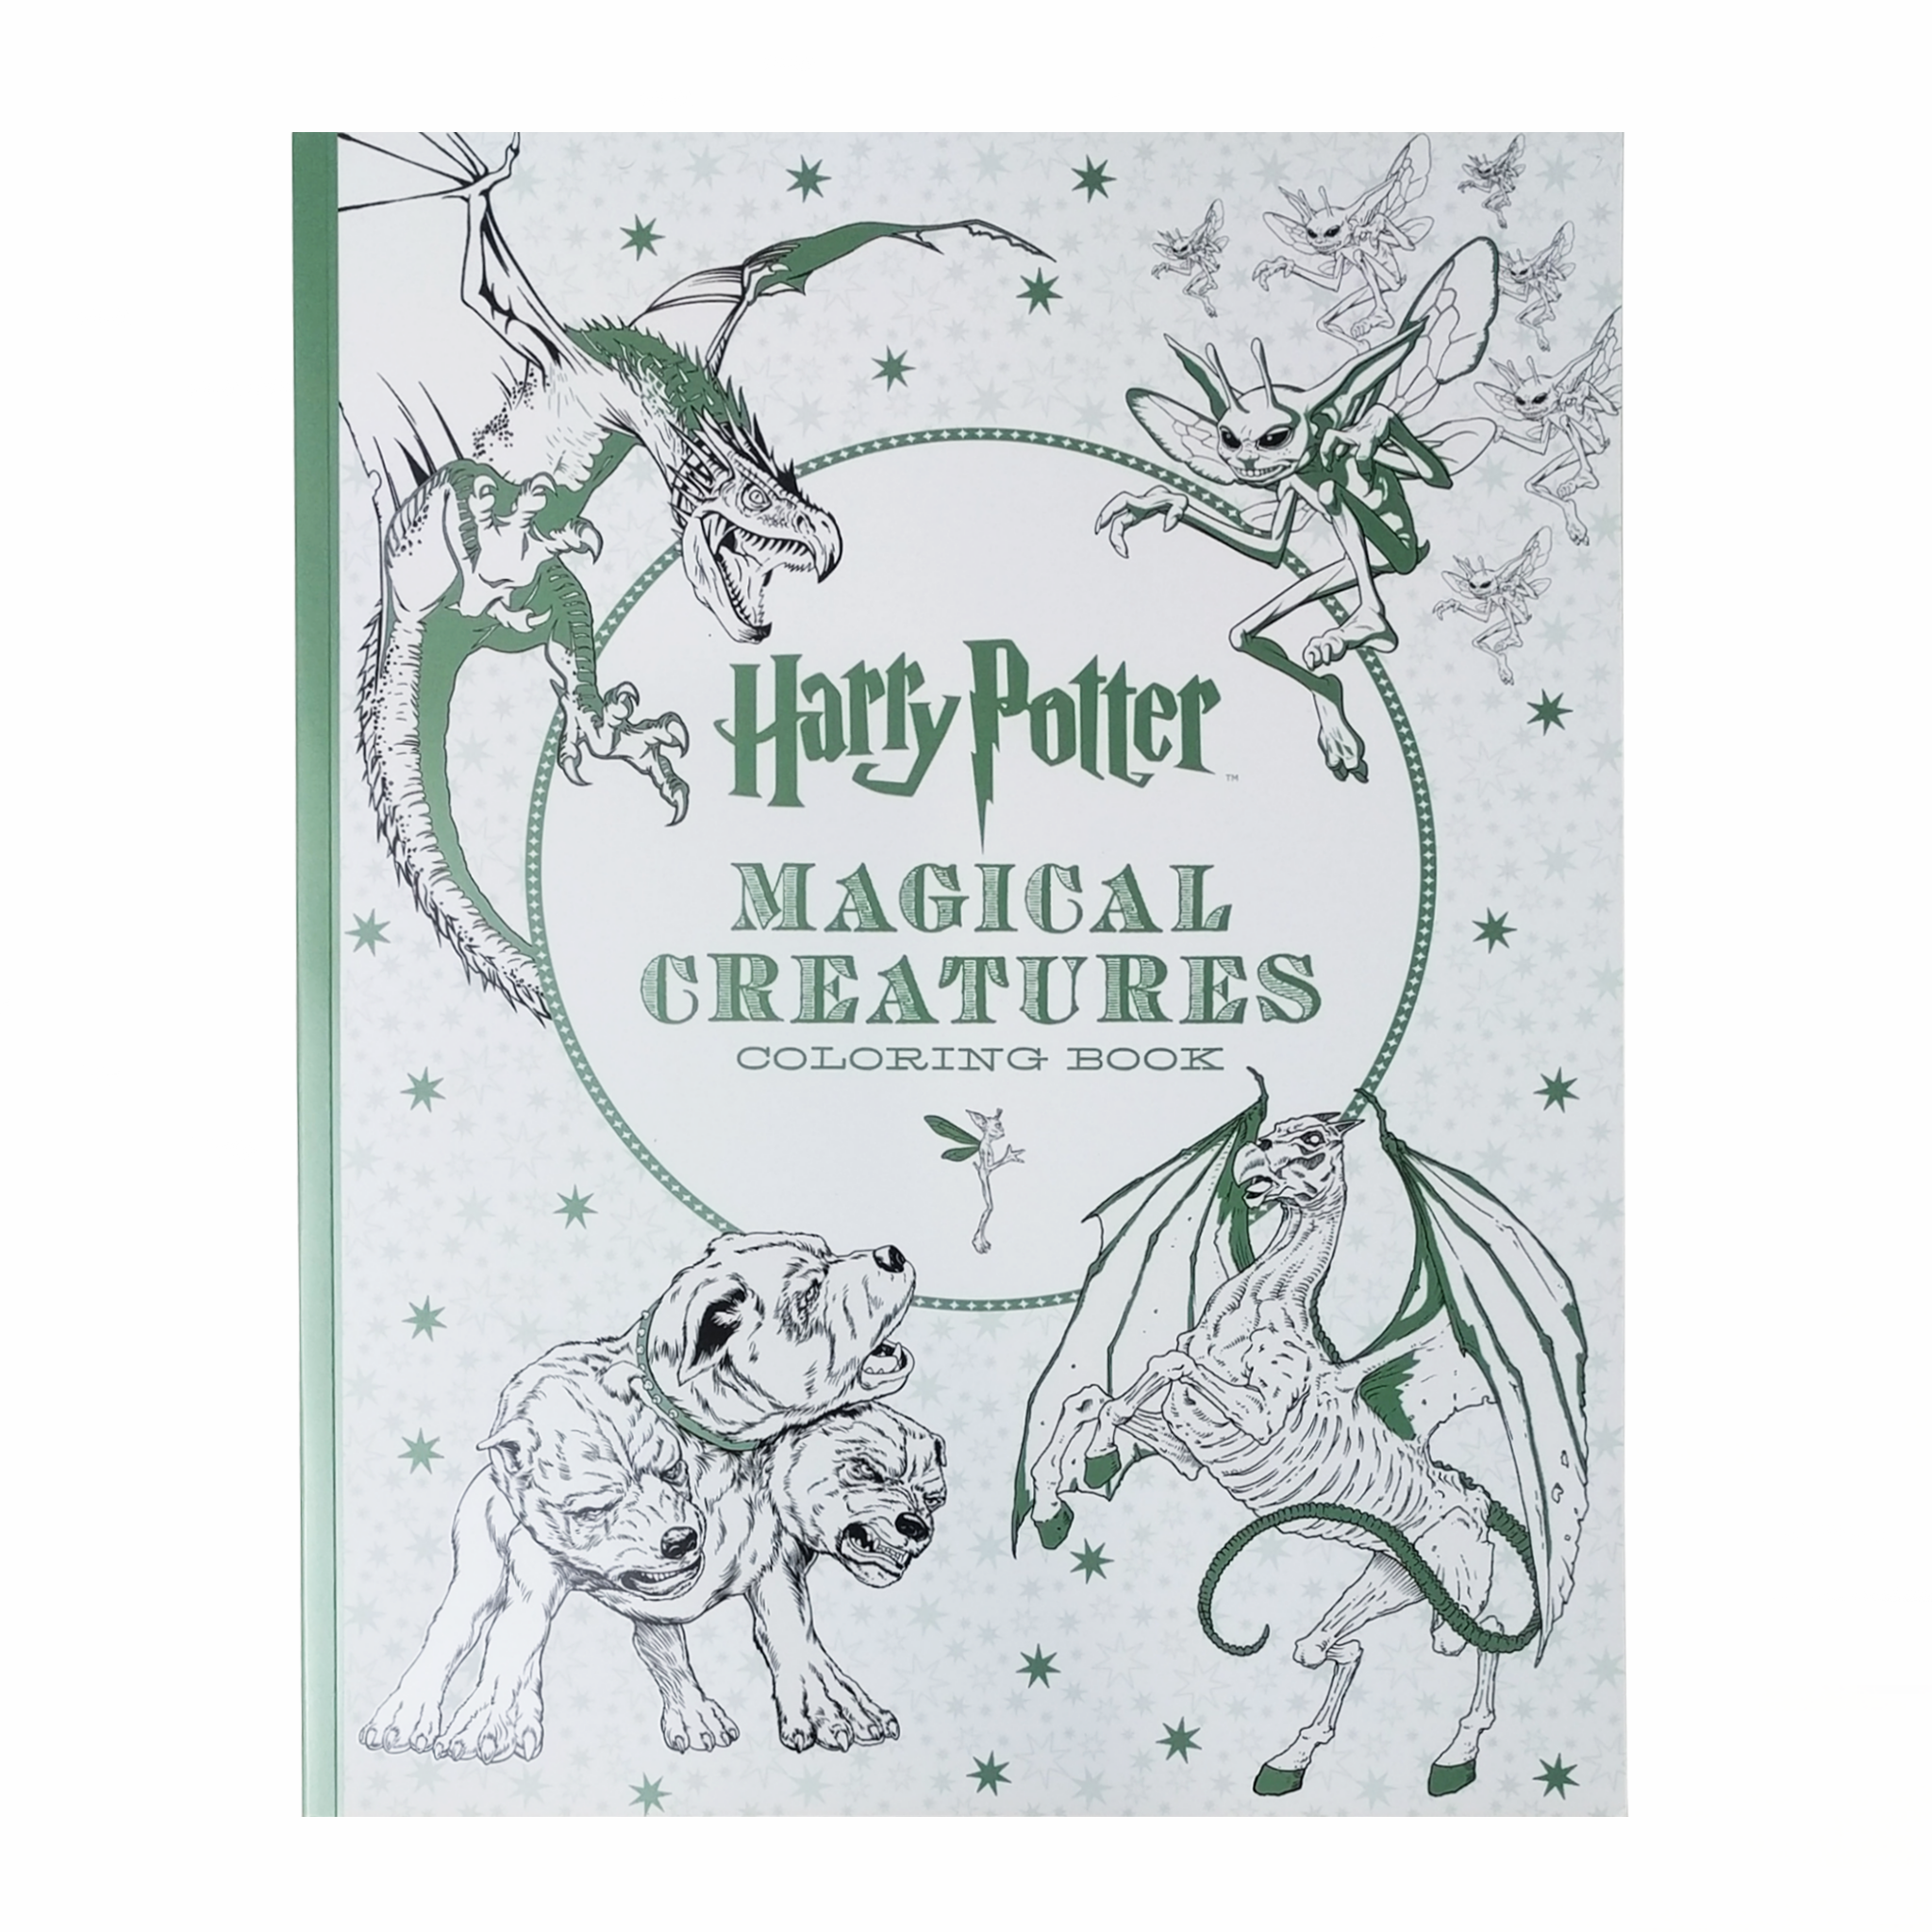 Harry Potter Magical Creatures Colouring Book – By Scholastic